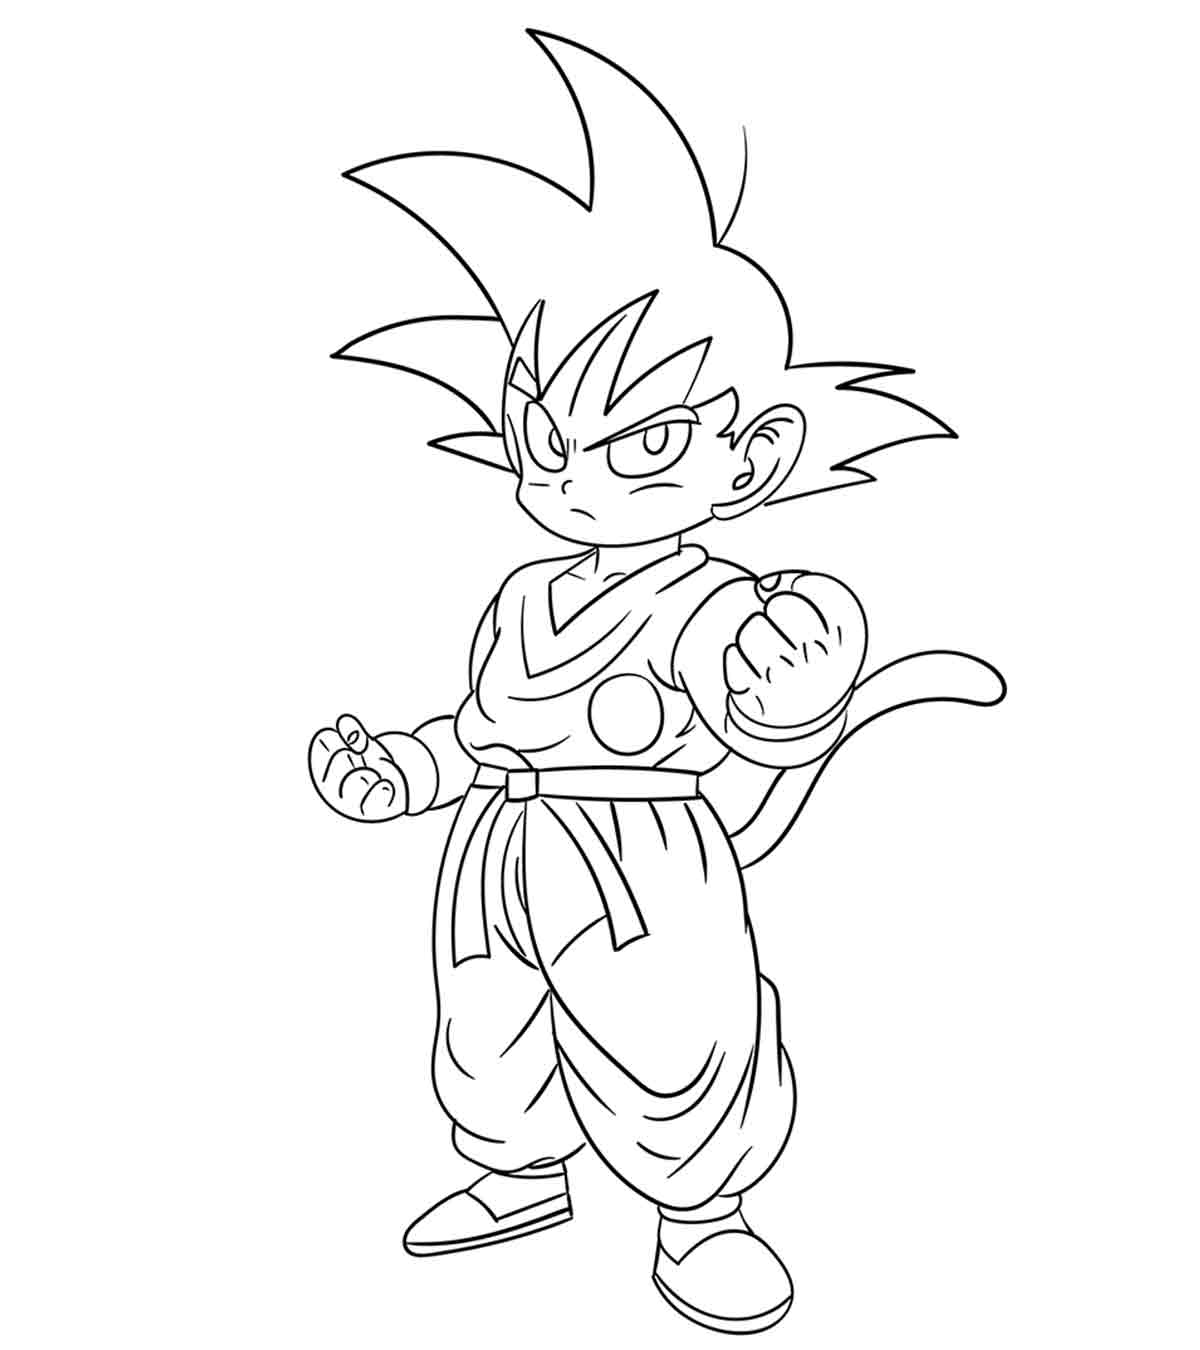 Top 20 Dragon Ball Z Coloring Pages Your Toddler Will Love